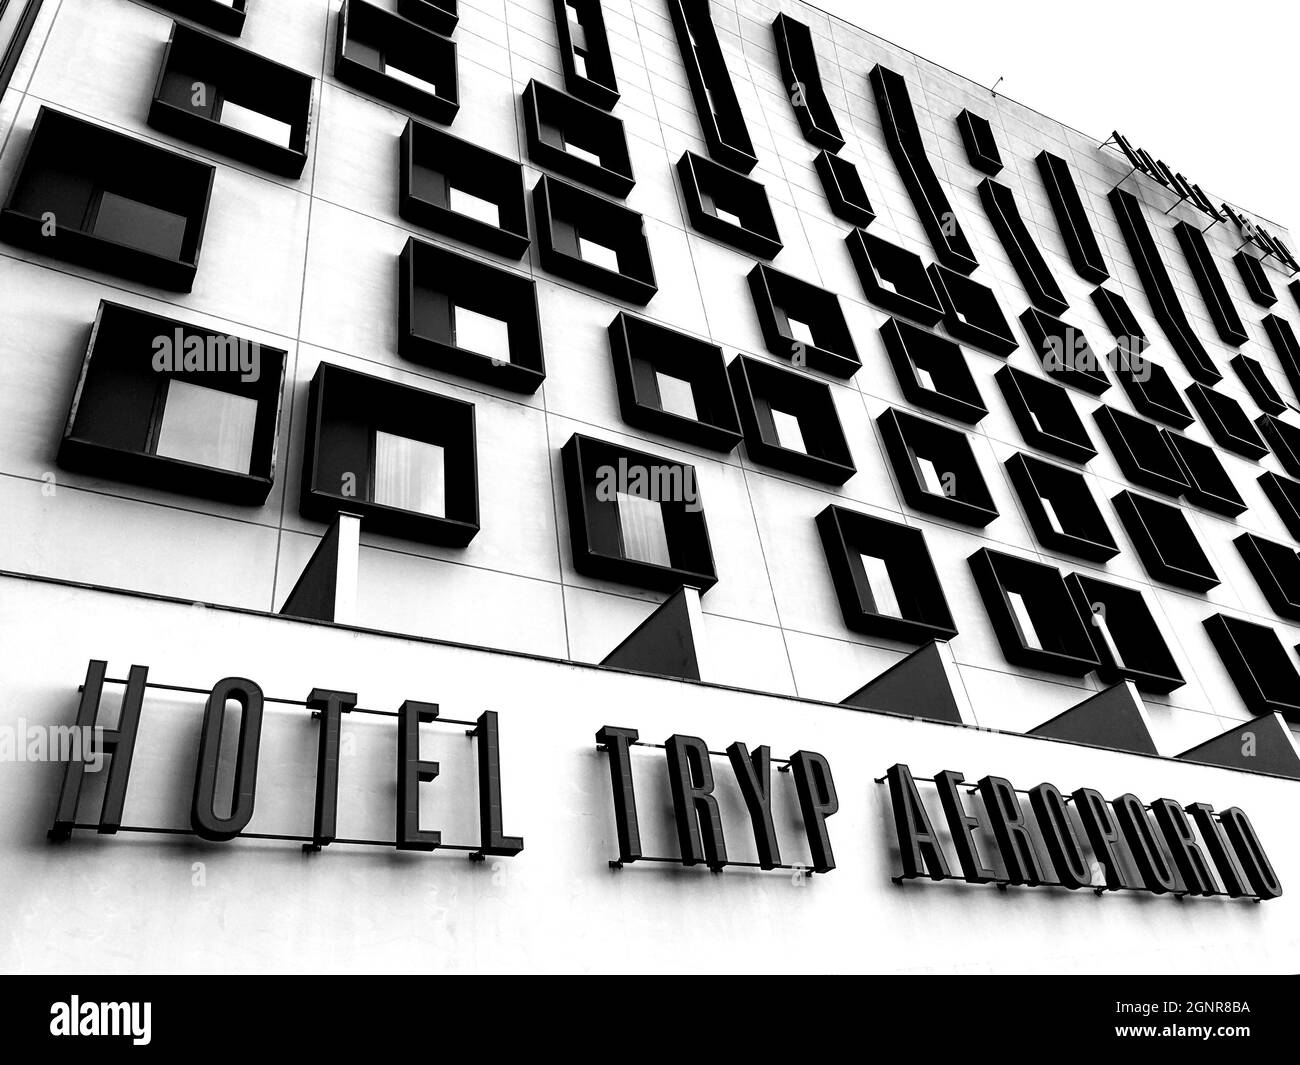 Airport Hotel Tryp, Lissabon, Portugal Banque D'Images